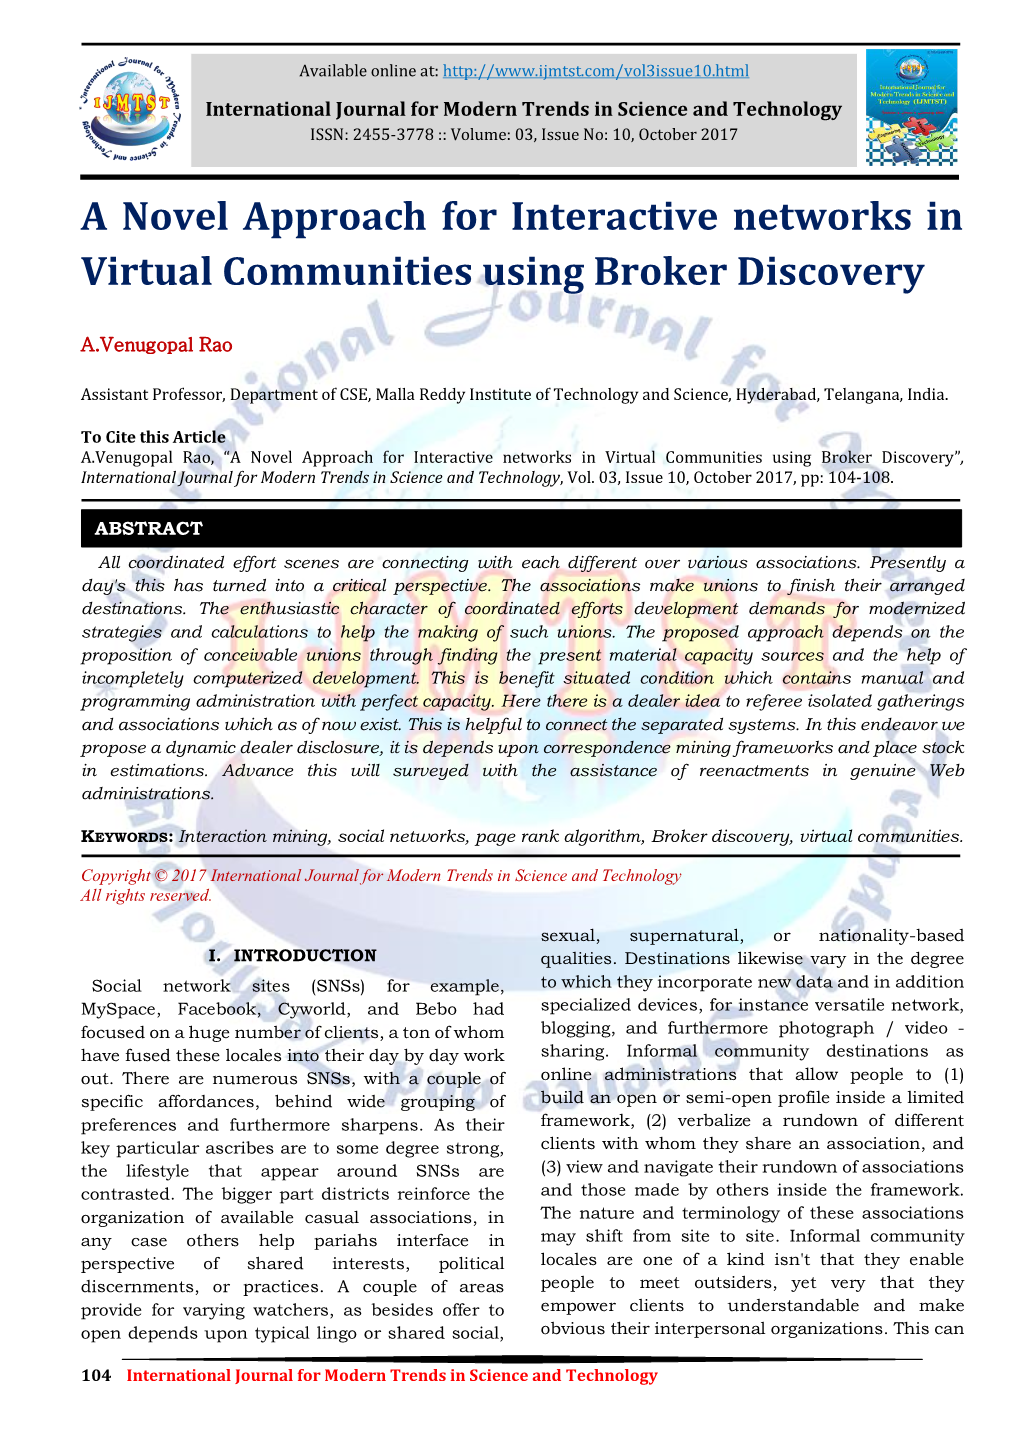 A Novel Approach for Interactive Networks in Virtual Communities Using Broker Discovery